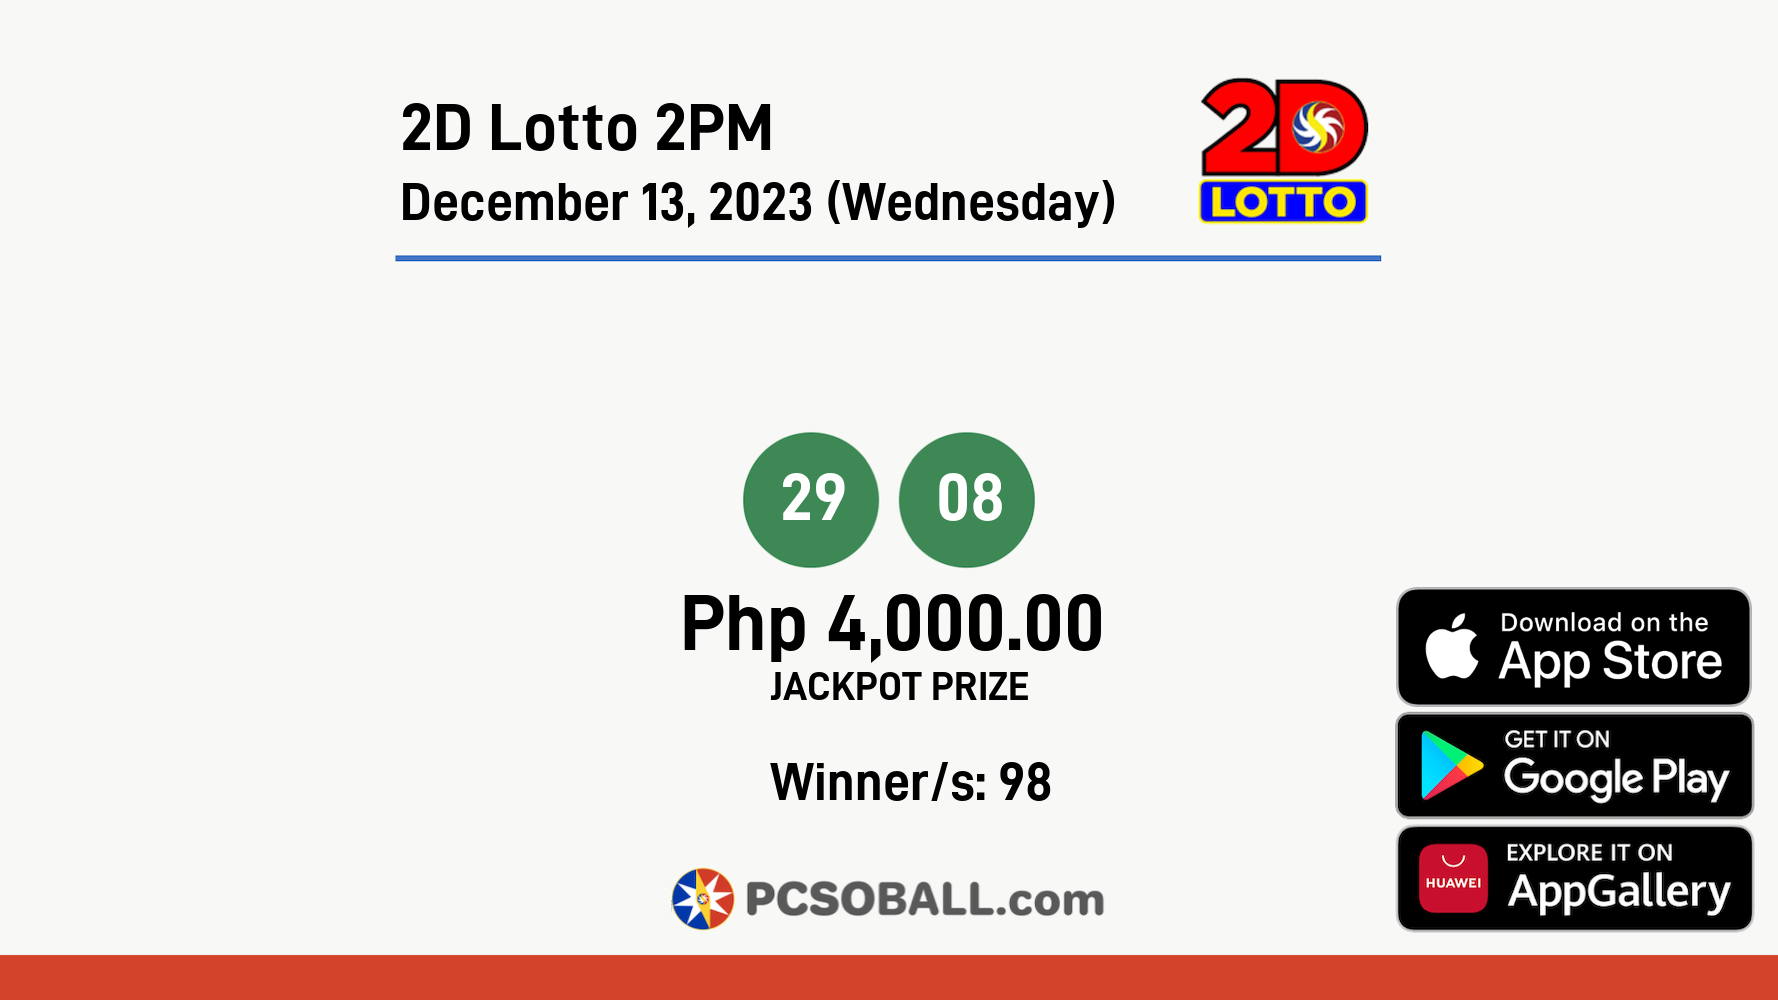 2D Lotto 2PM December 13, 2023 (Wednesday) Result